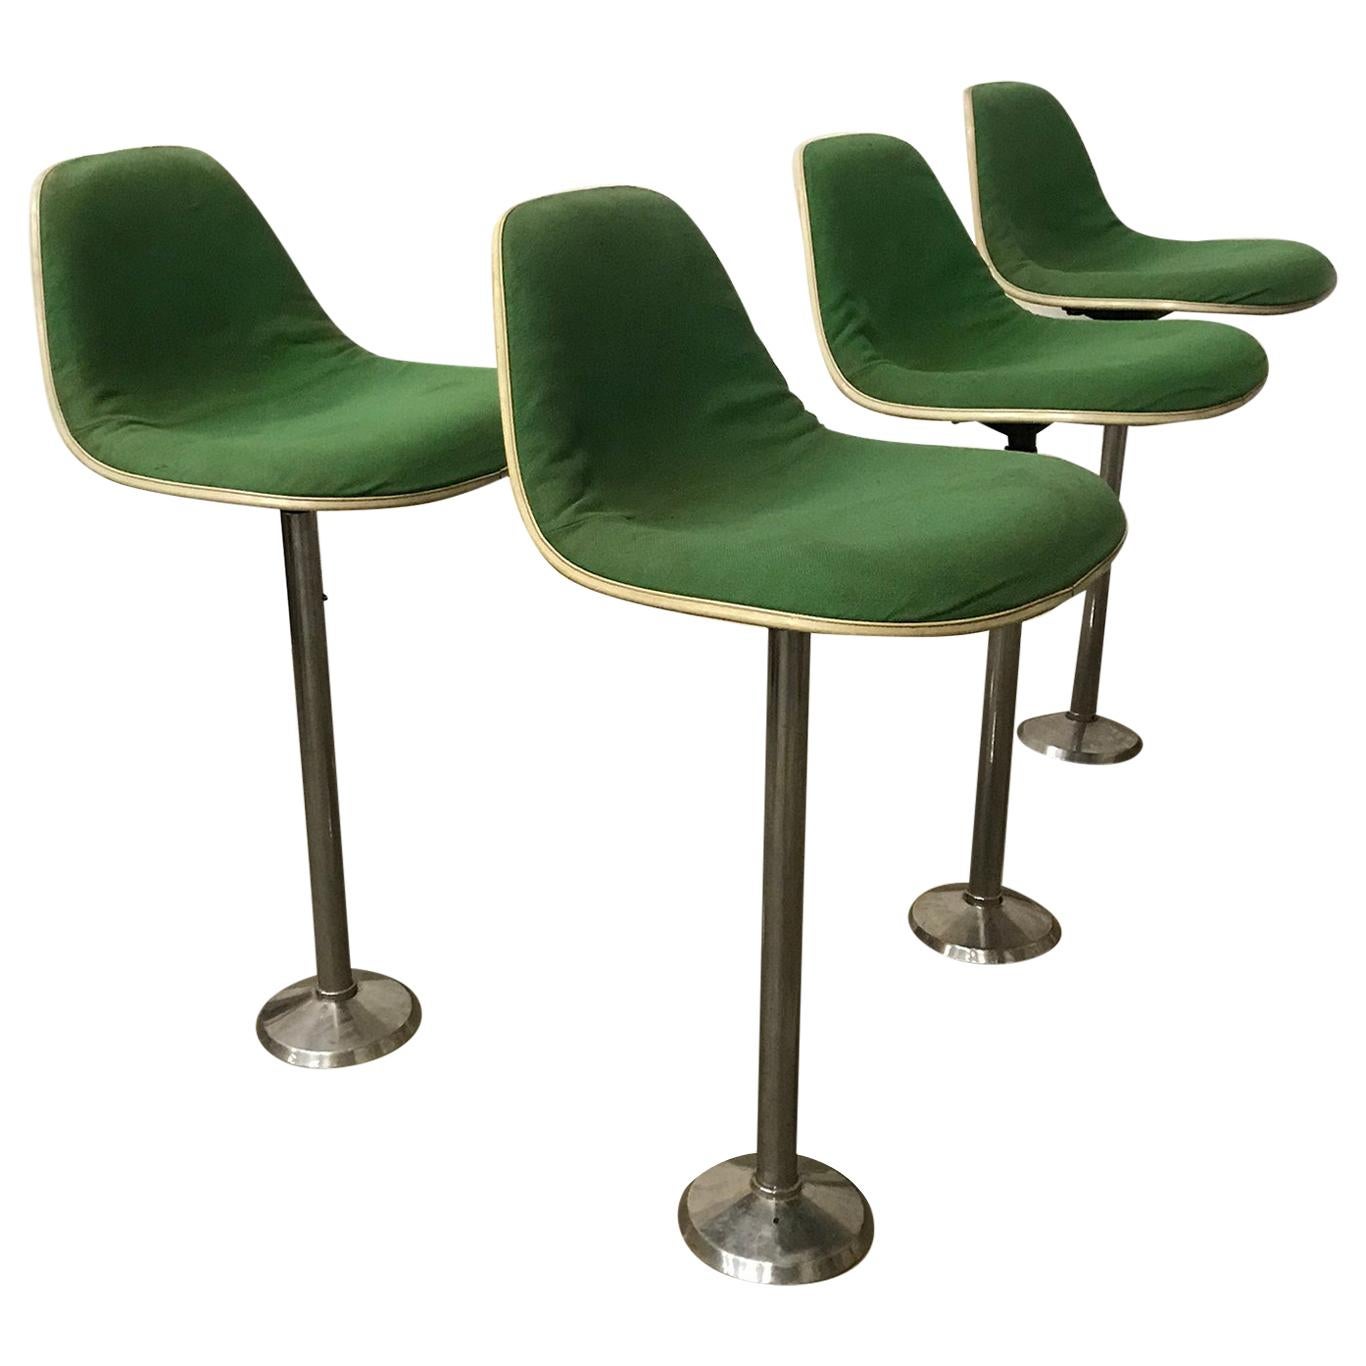 1969 Eames Herman Miller/Fehlbaum Extremely Rare White Barstools in Green Fabric For Sale